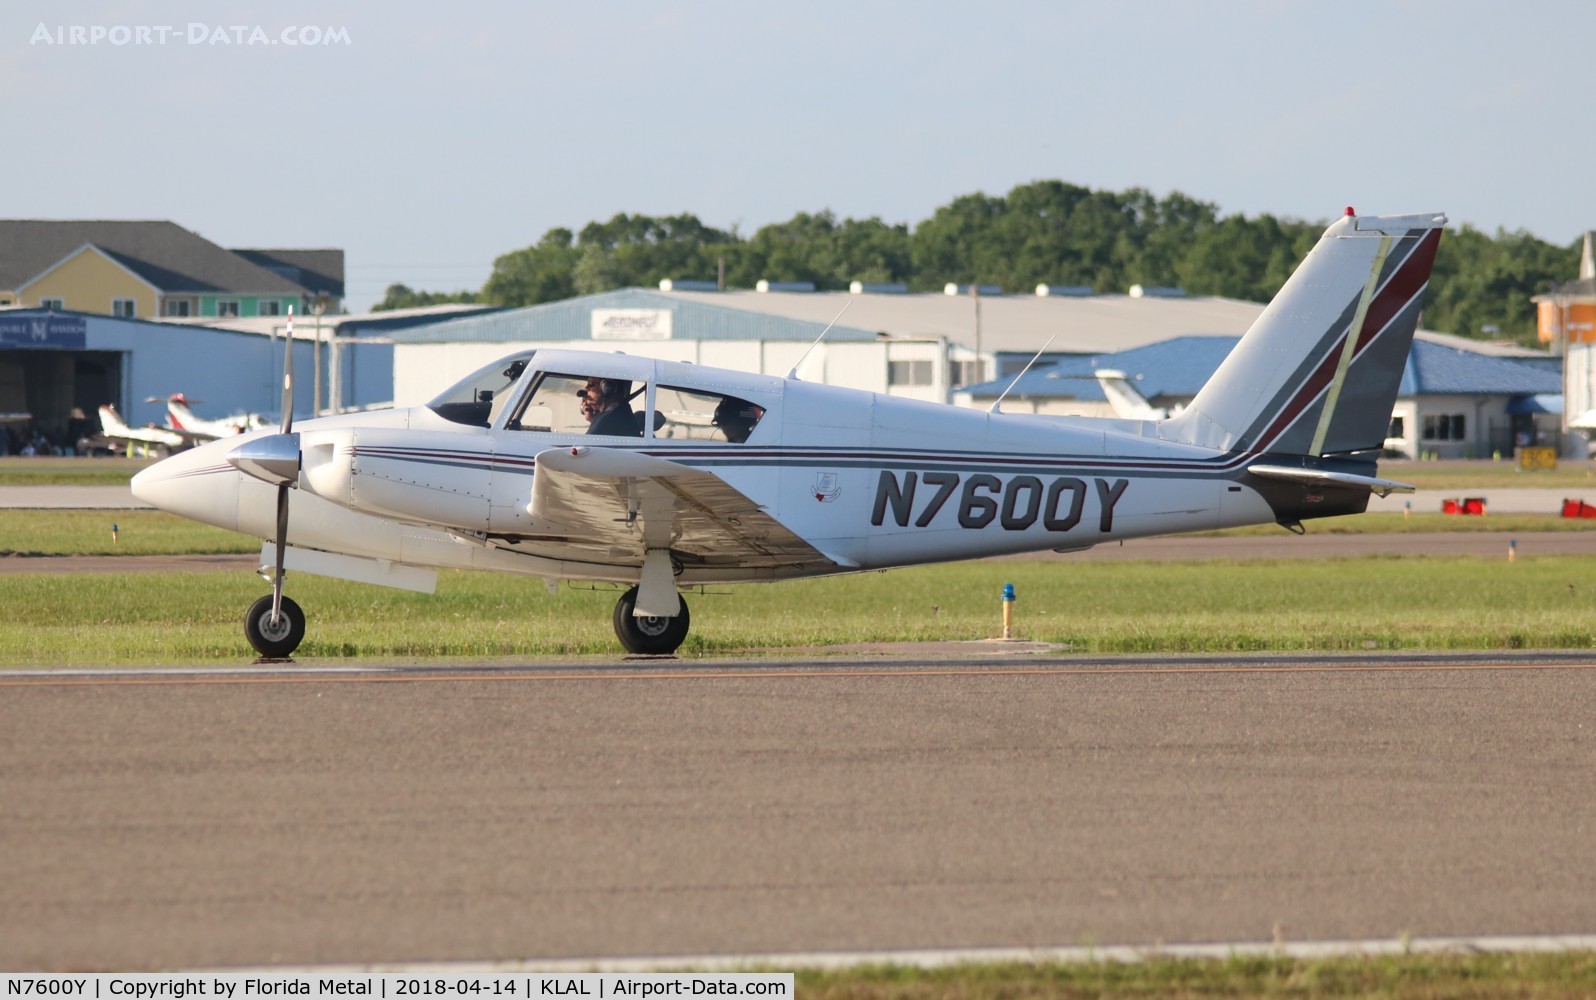 N7600Y, 1964 Piper PA-30 Twin Comanche C/N 30-669, SNF LAL 2018